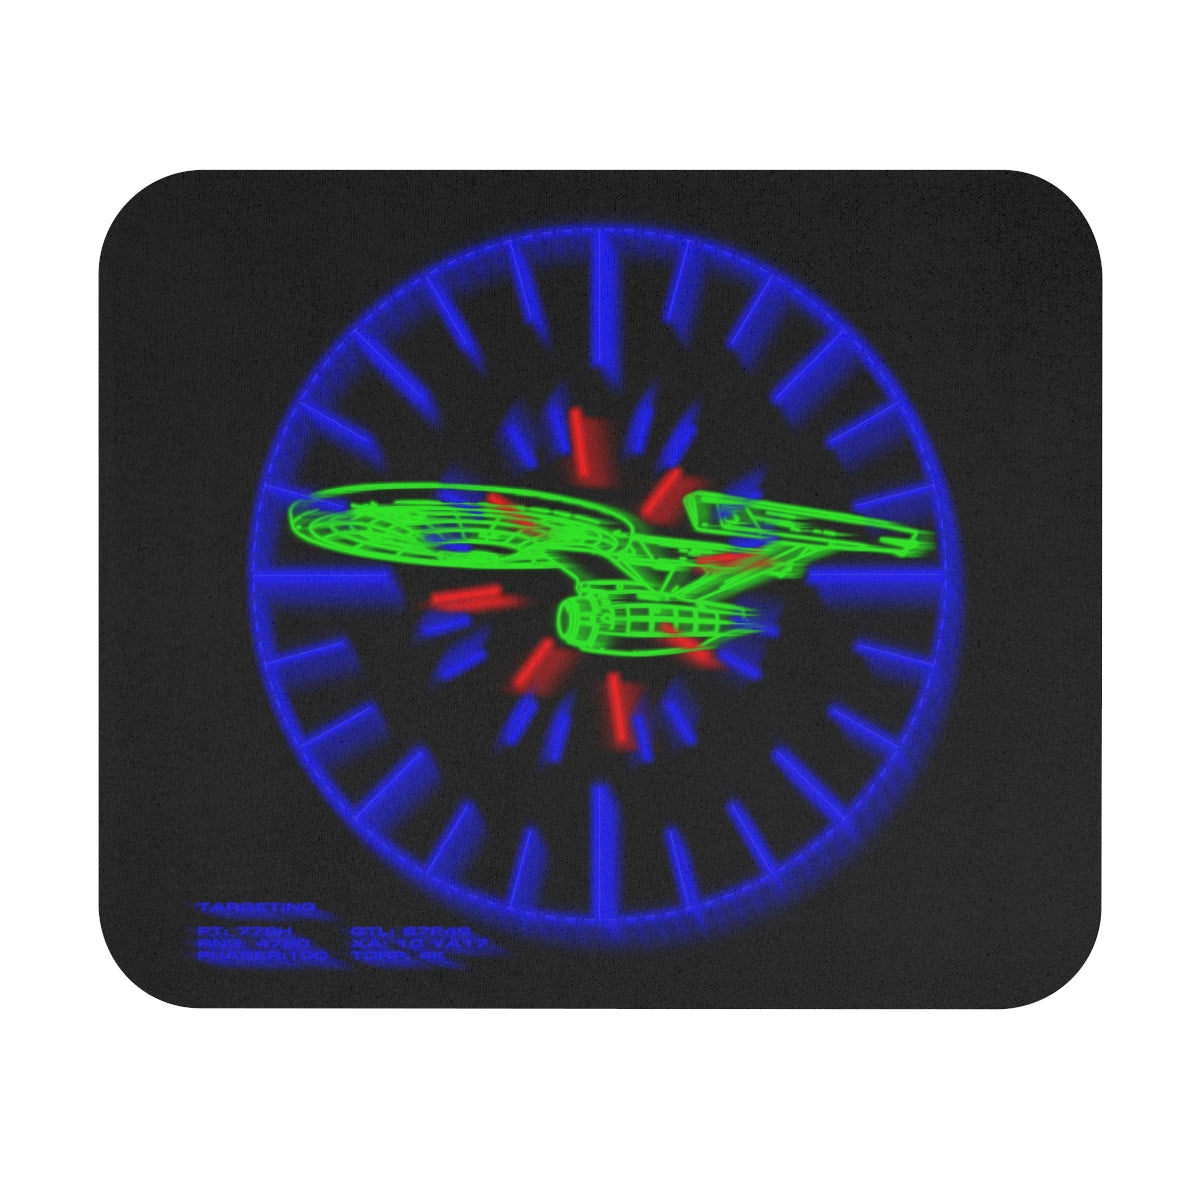 TWOK Reliant Targeting Scanner LCARS Mouse Pad - Wrath of Khan